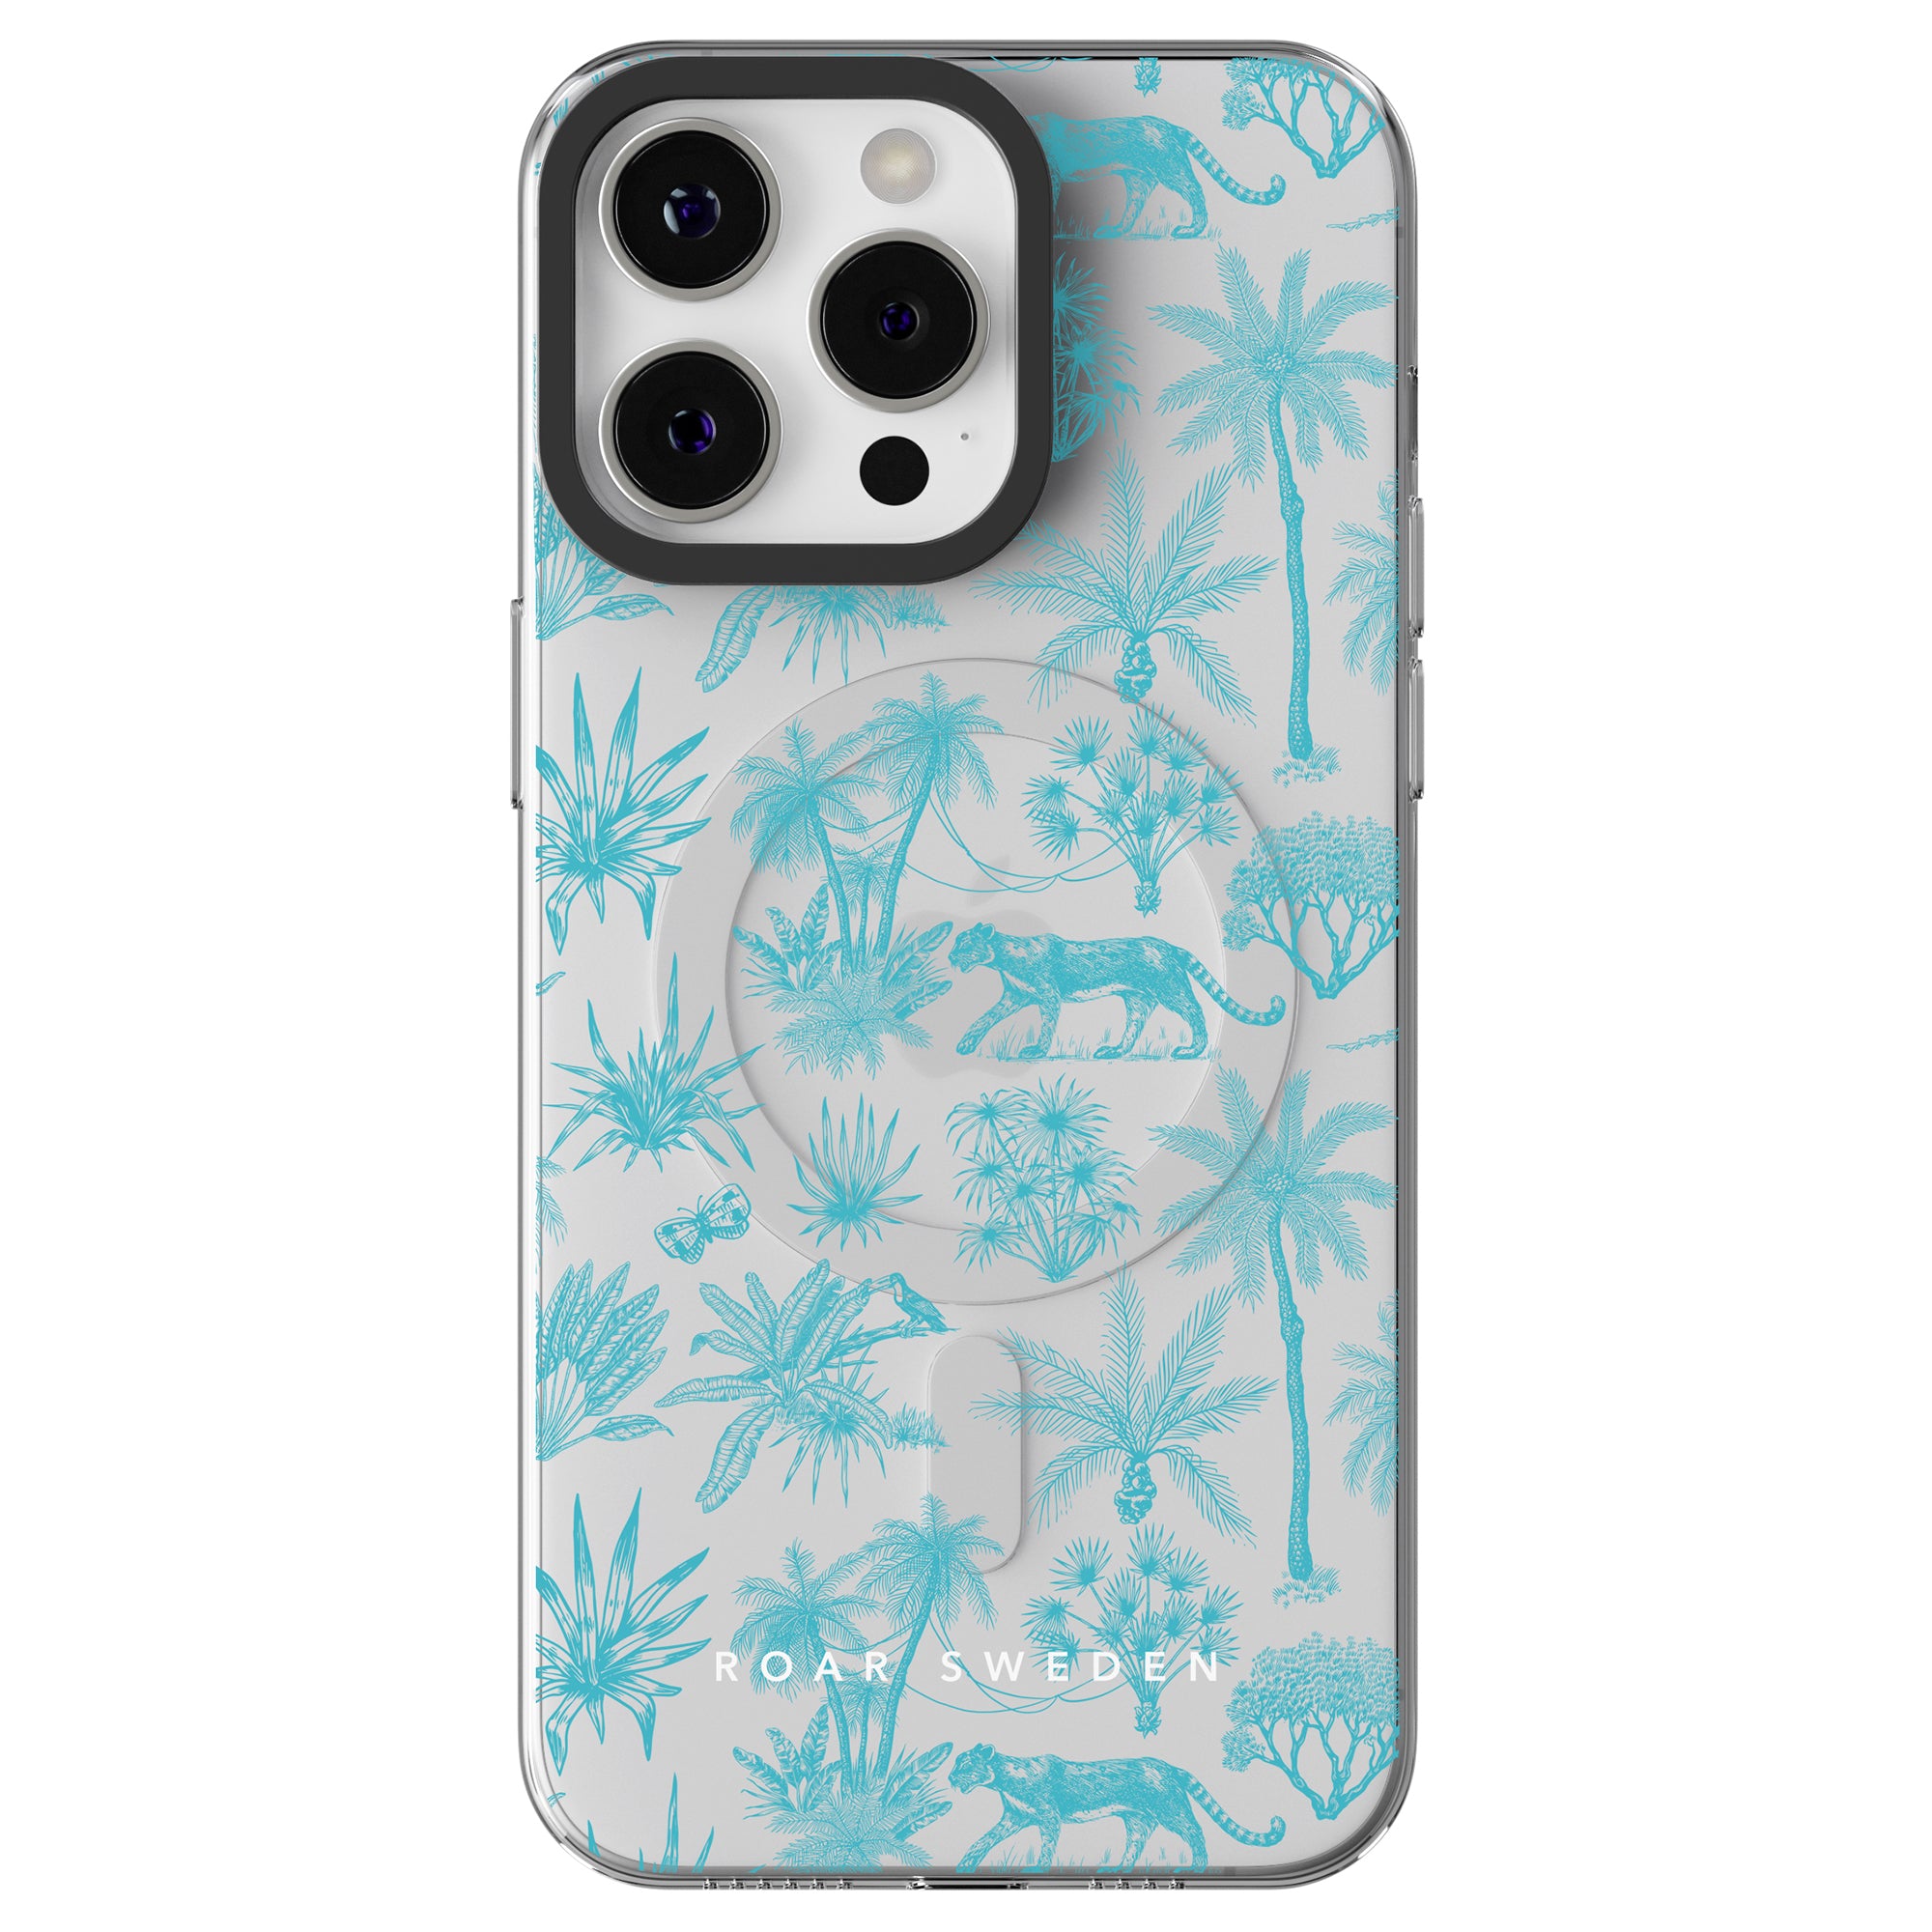 A Toile De Jouy Capri - MagSafe with a Toile de Jouy Capri design blending palm trees and animal prints on a teal and white phone case, featuring dual rear cameras and MagSafe compatibility.